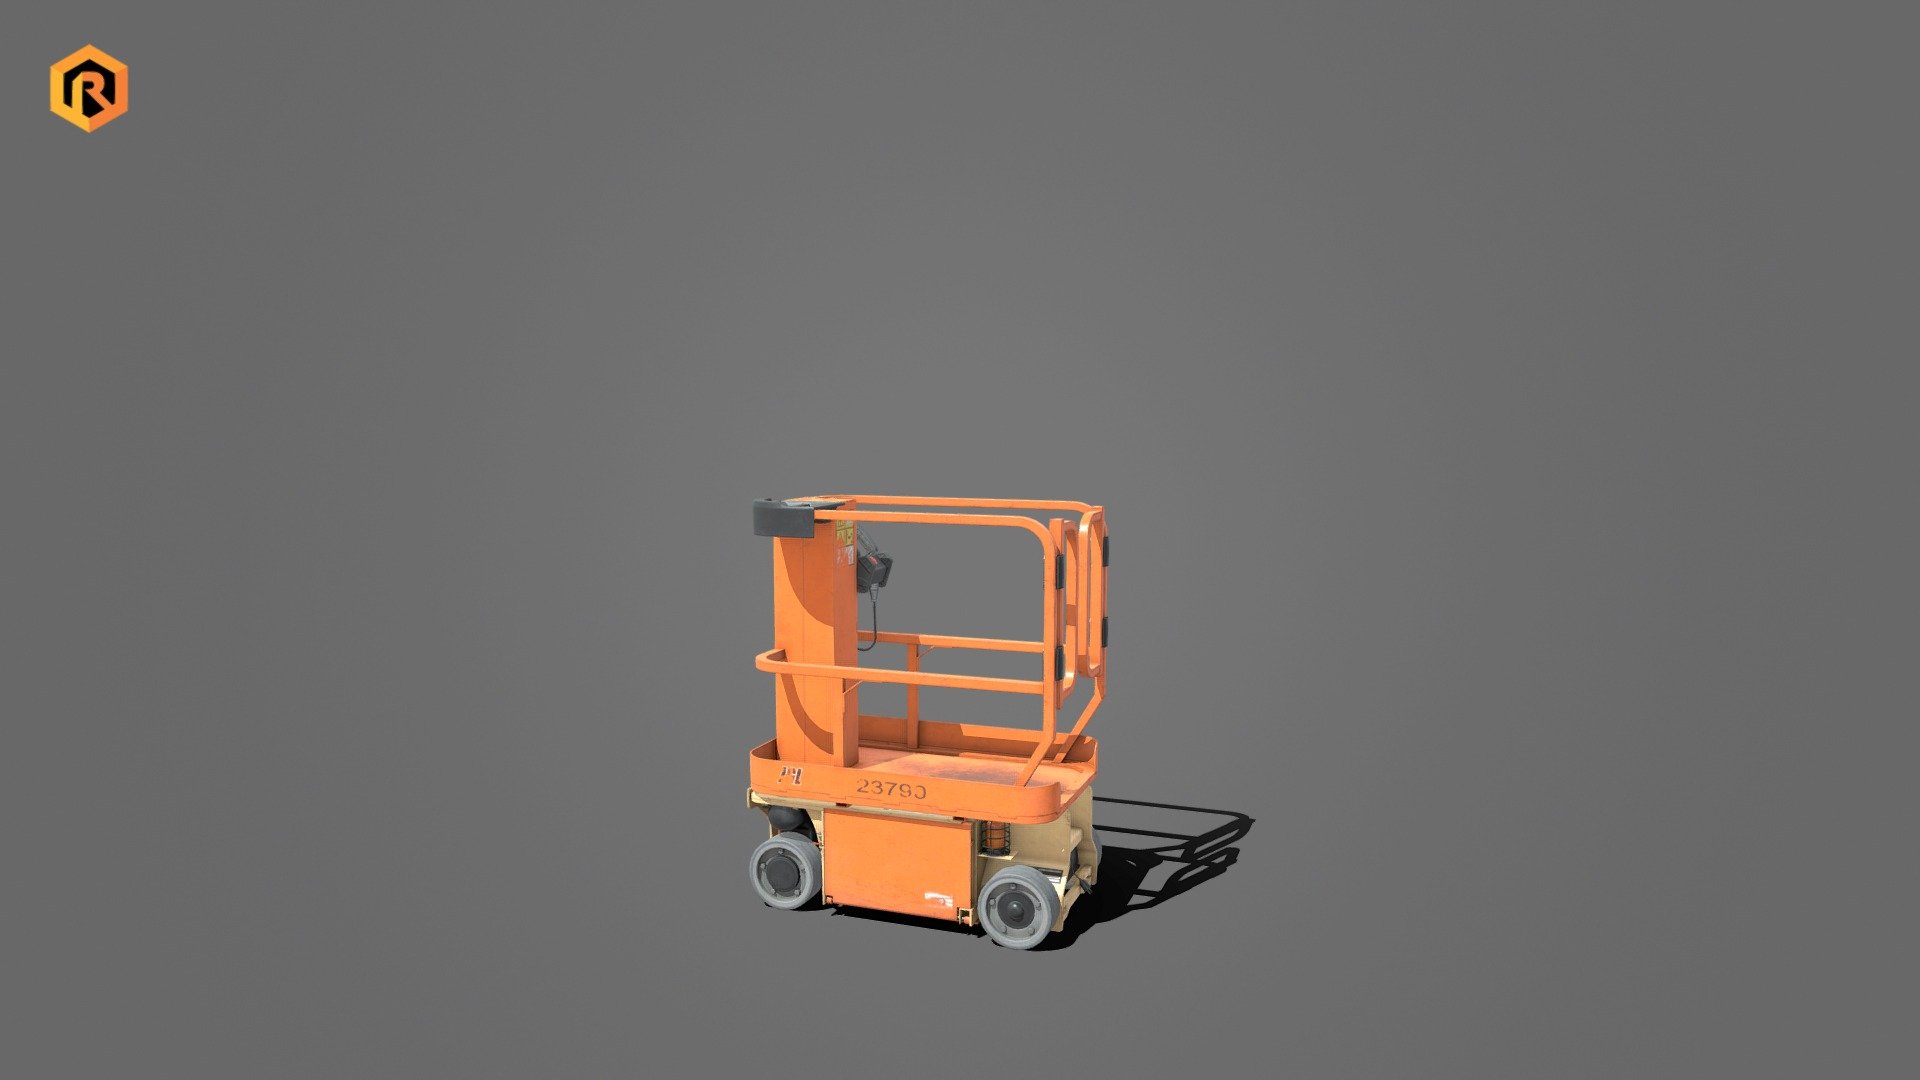 Low-poly PBR 3D model of Aerial Work Platform.

Lift elements are correctly divided so that the elevator can be animated up and down.

This object is best for use in games and other VR / AR, real-time applications such as Unity or Unreal Engine.  

Technical details:




1 Main Body PBR textures set

14130 Triangles

14853 Vertices

The model is divided into few objects to suit animation process.

There is also collapsed version of the object (one mesh).

Model completely unwrapped.

Model is fully textured with all materials applied.

Pivot points are correctly placed to suit animation process.

Lot of additional file formats included (Blender, Unity, Maya etc.)

More file formats are available in additional zip file on product page.  

Please feel free to contact me if you have any questions or need support for this asset 3d model